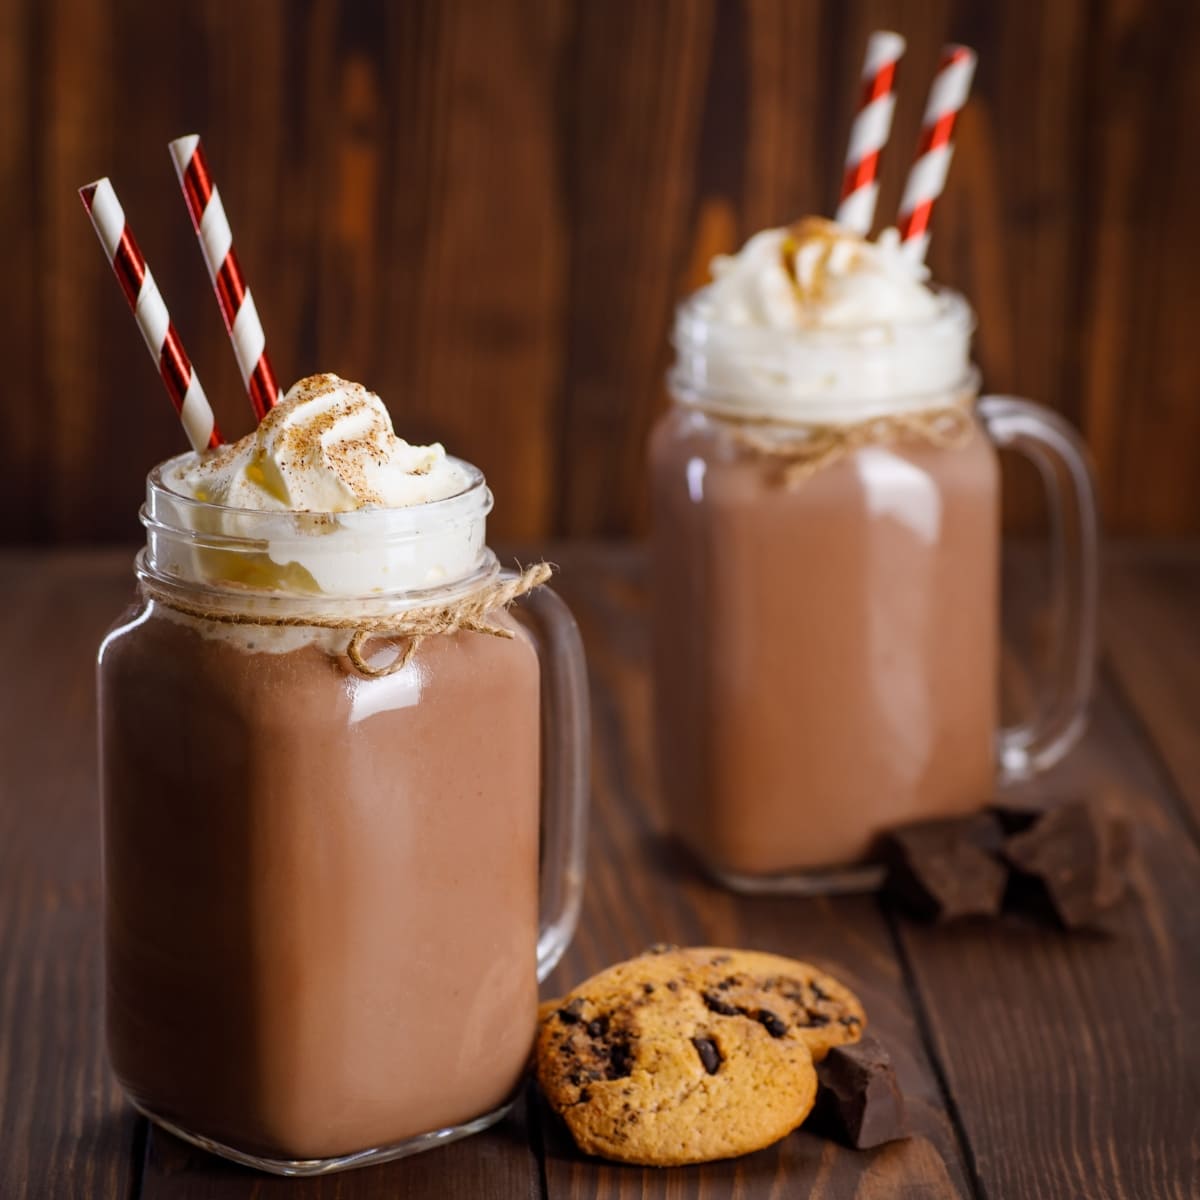 Two glass mugs of chocolate milkshake topped with whipped cream dusted with chocolate